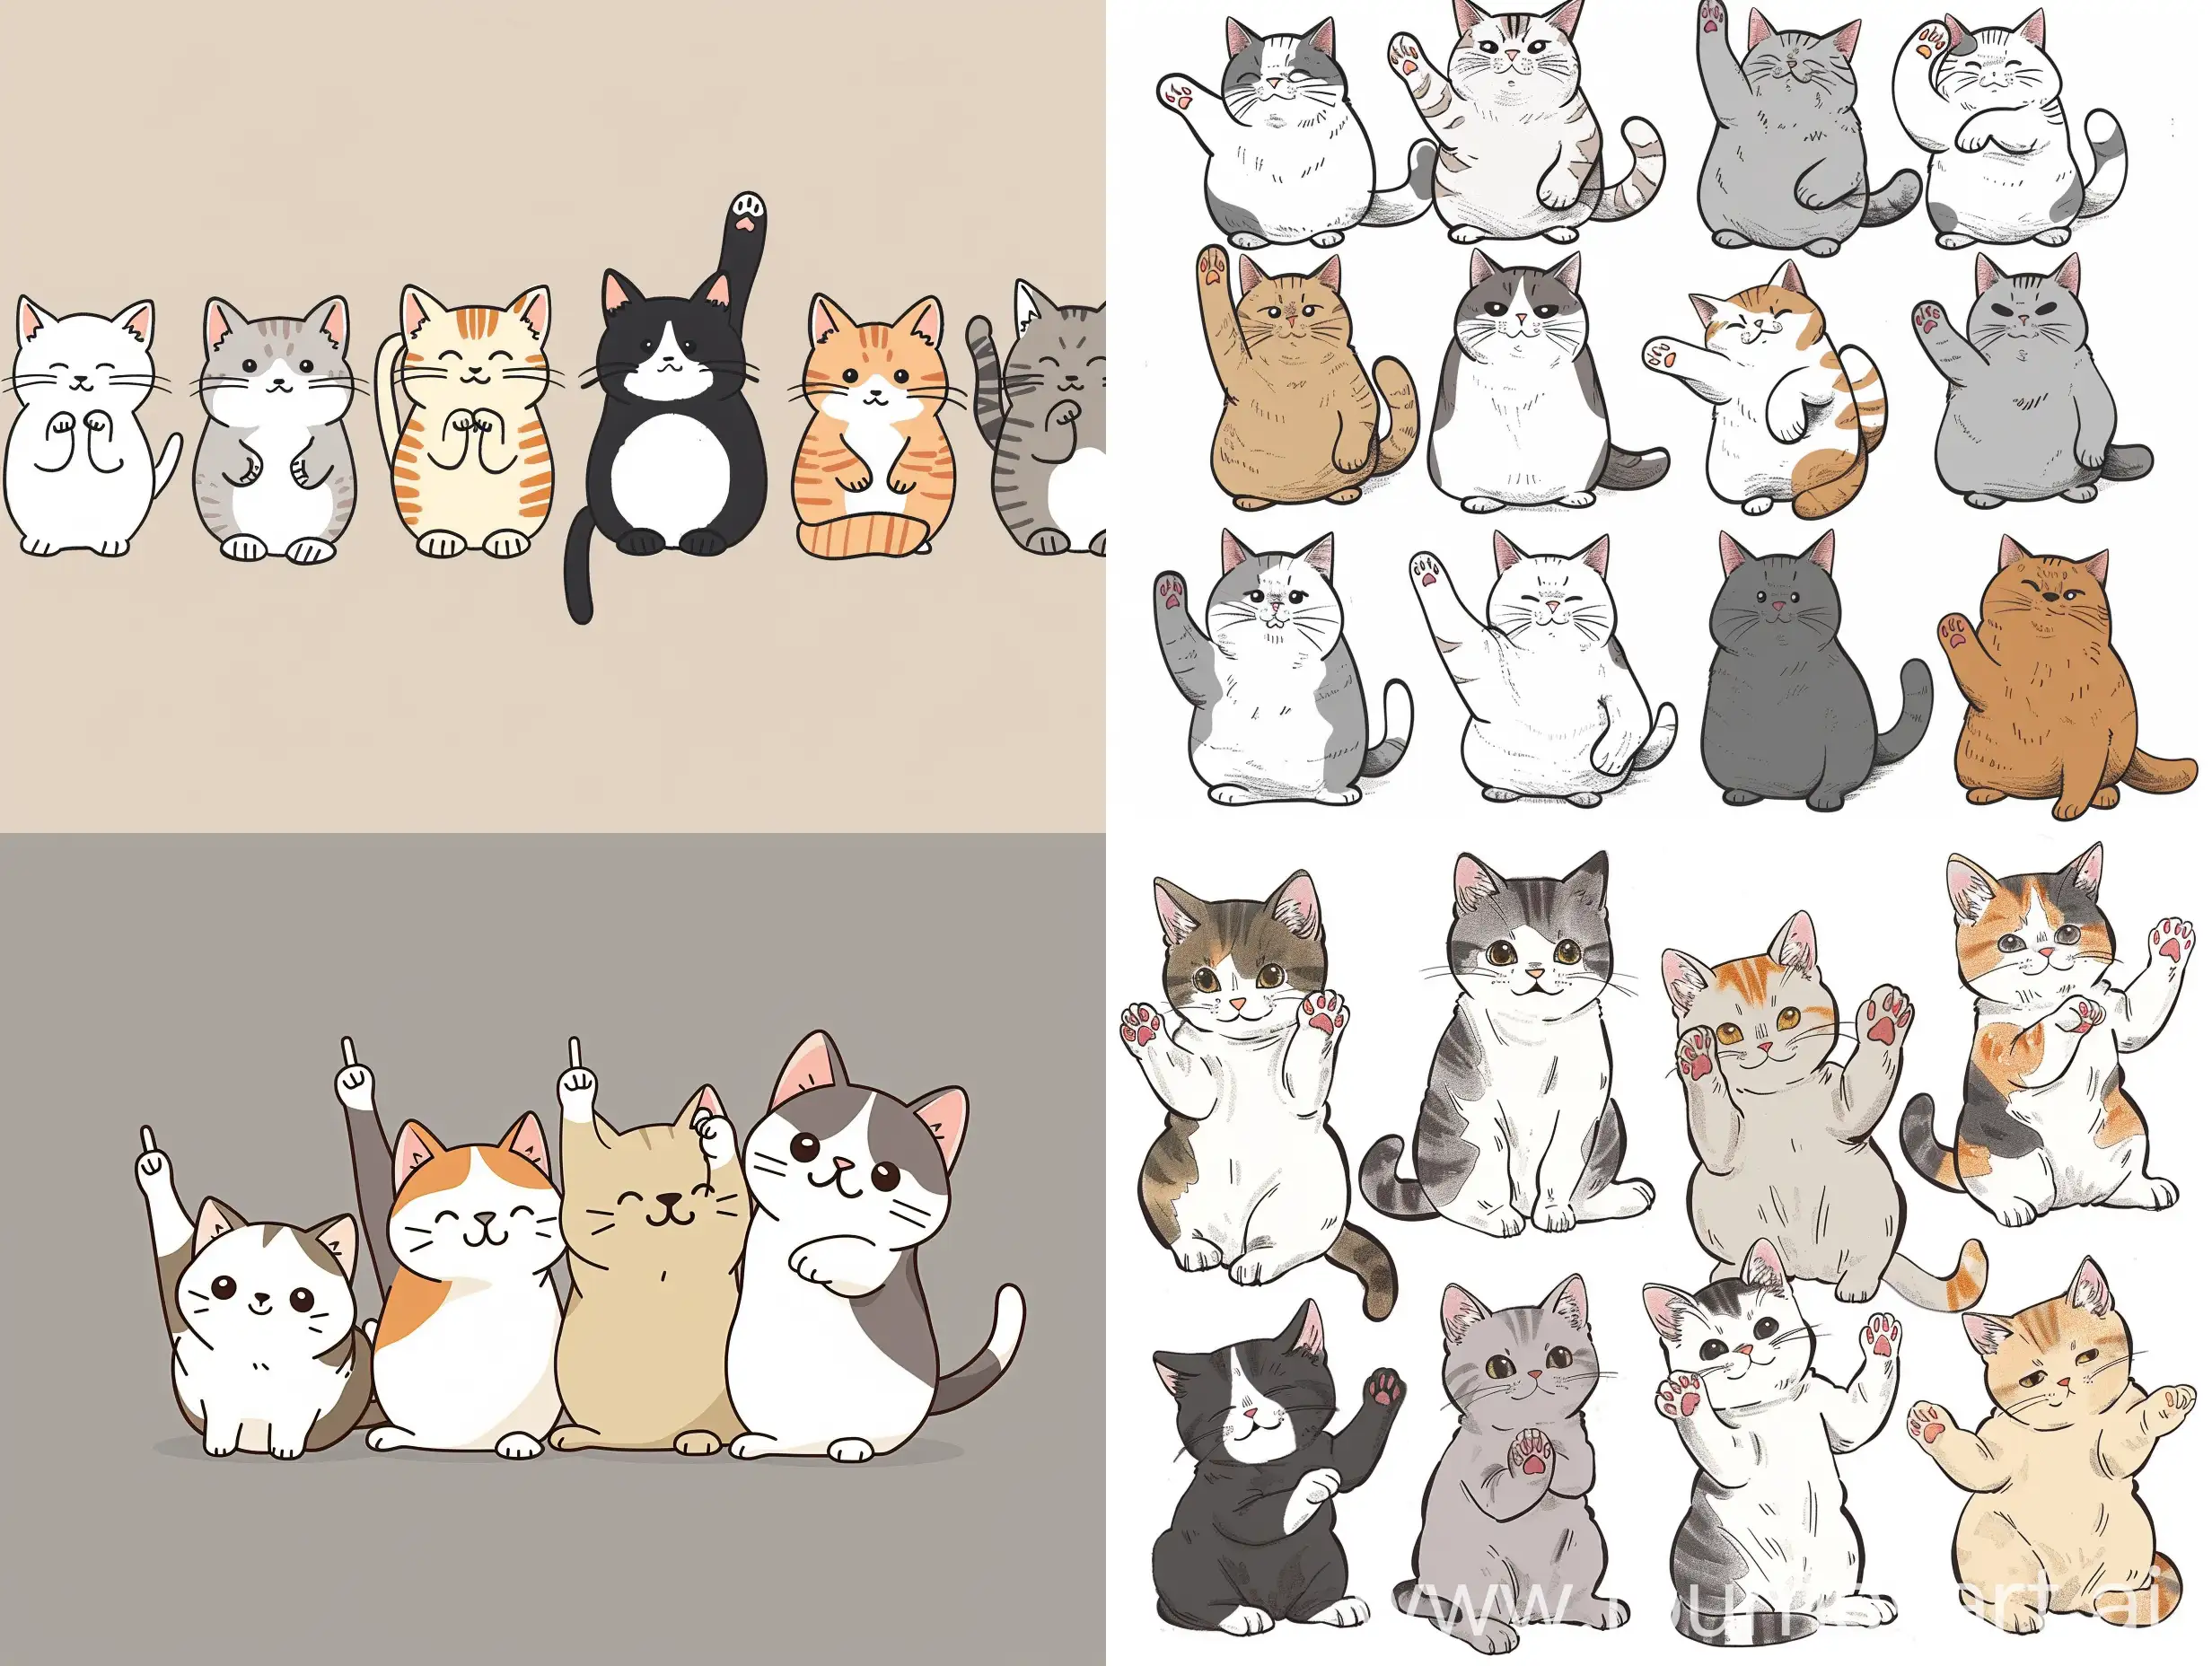 illustration of cute cats, japan style, doodle style, wallpaper, kittens of different styles look in the same direction and point their fingers in the same direction